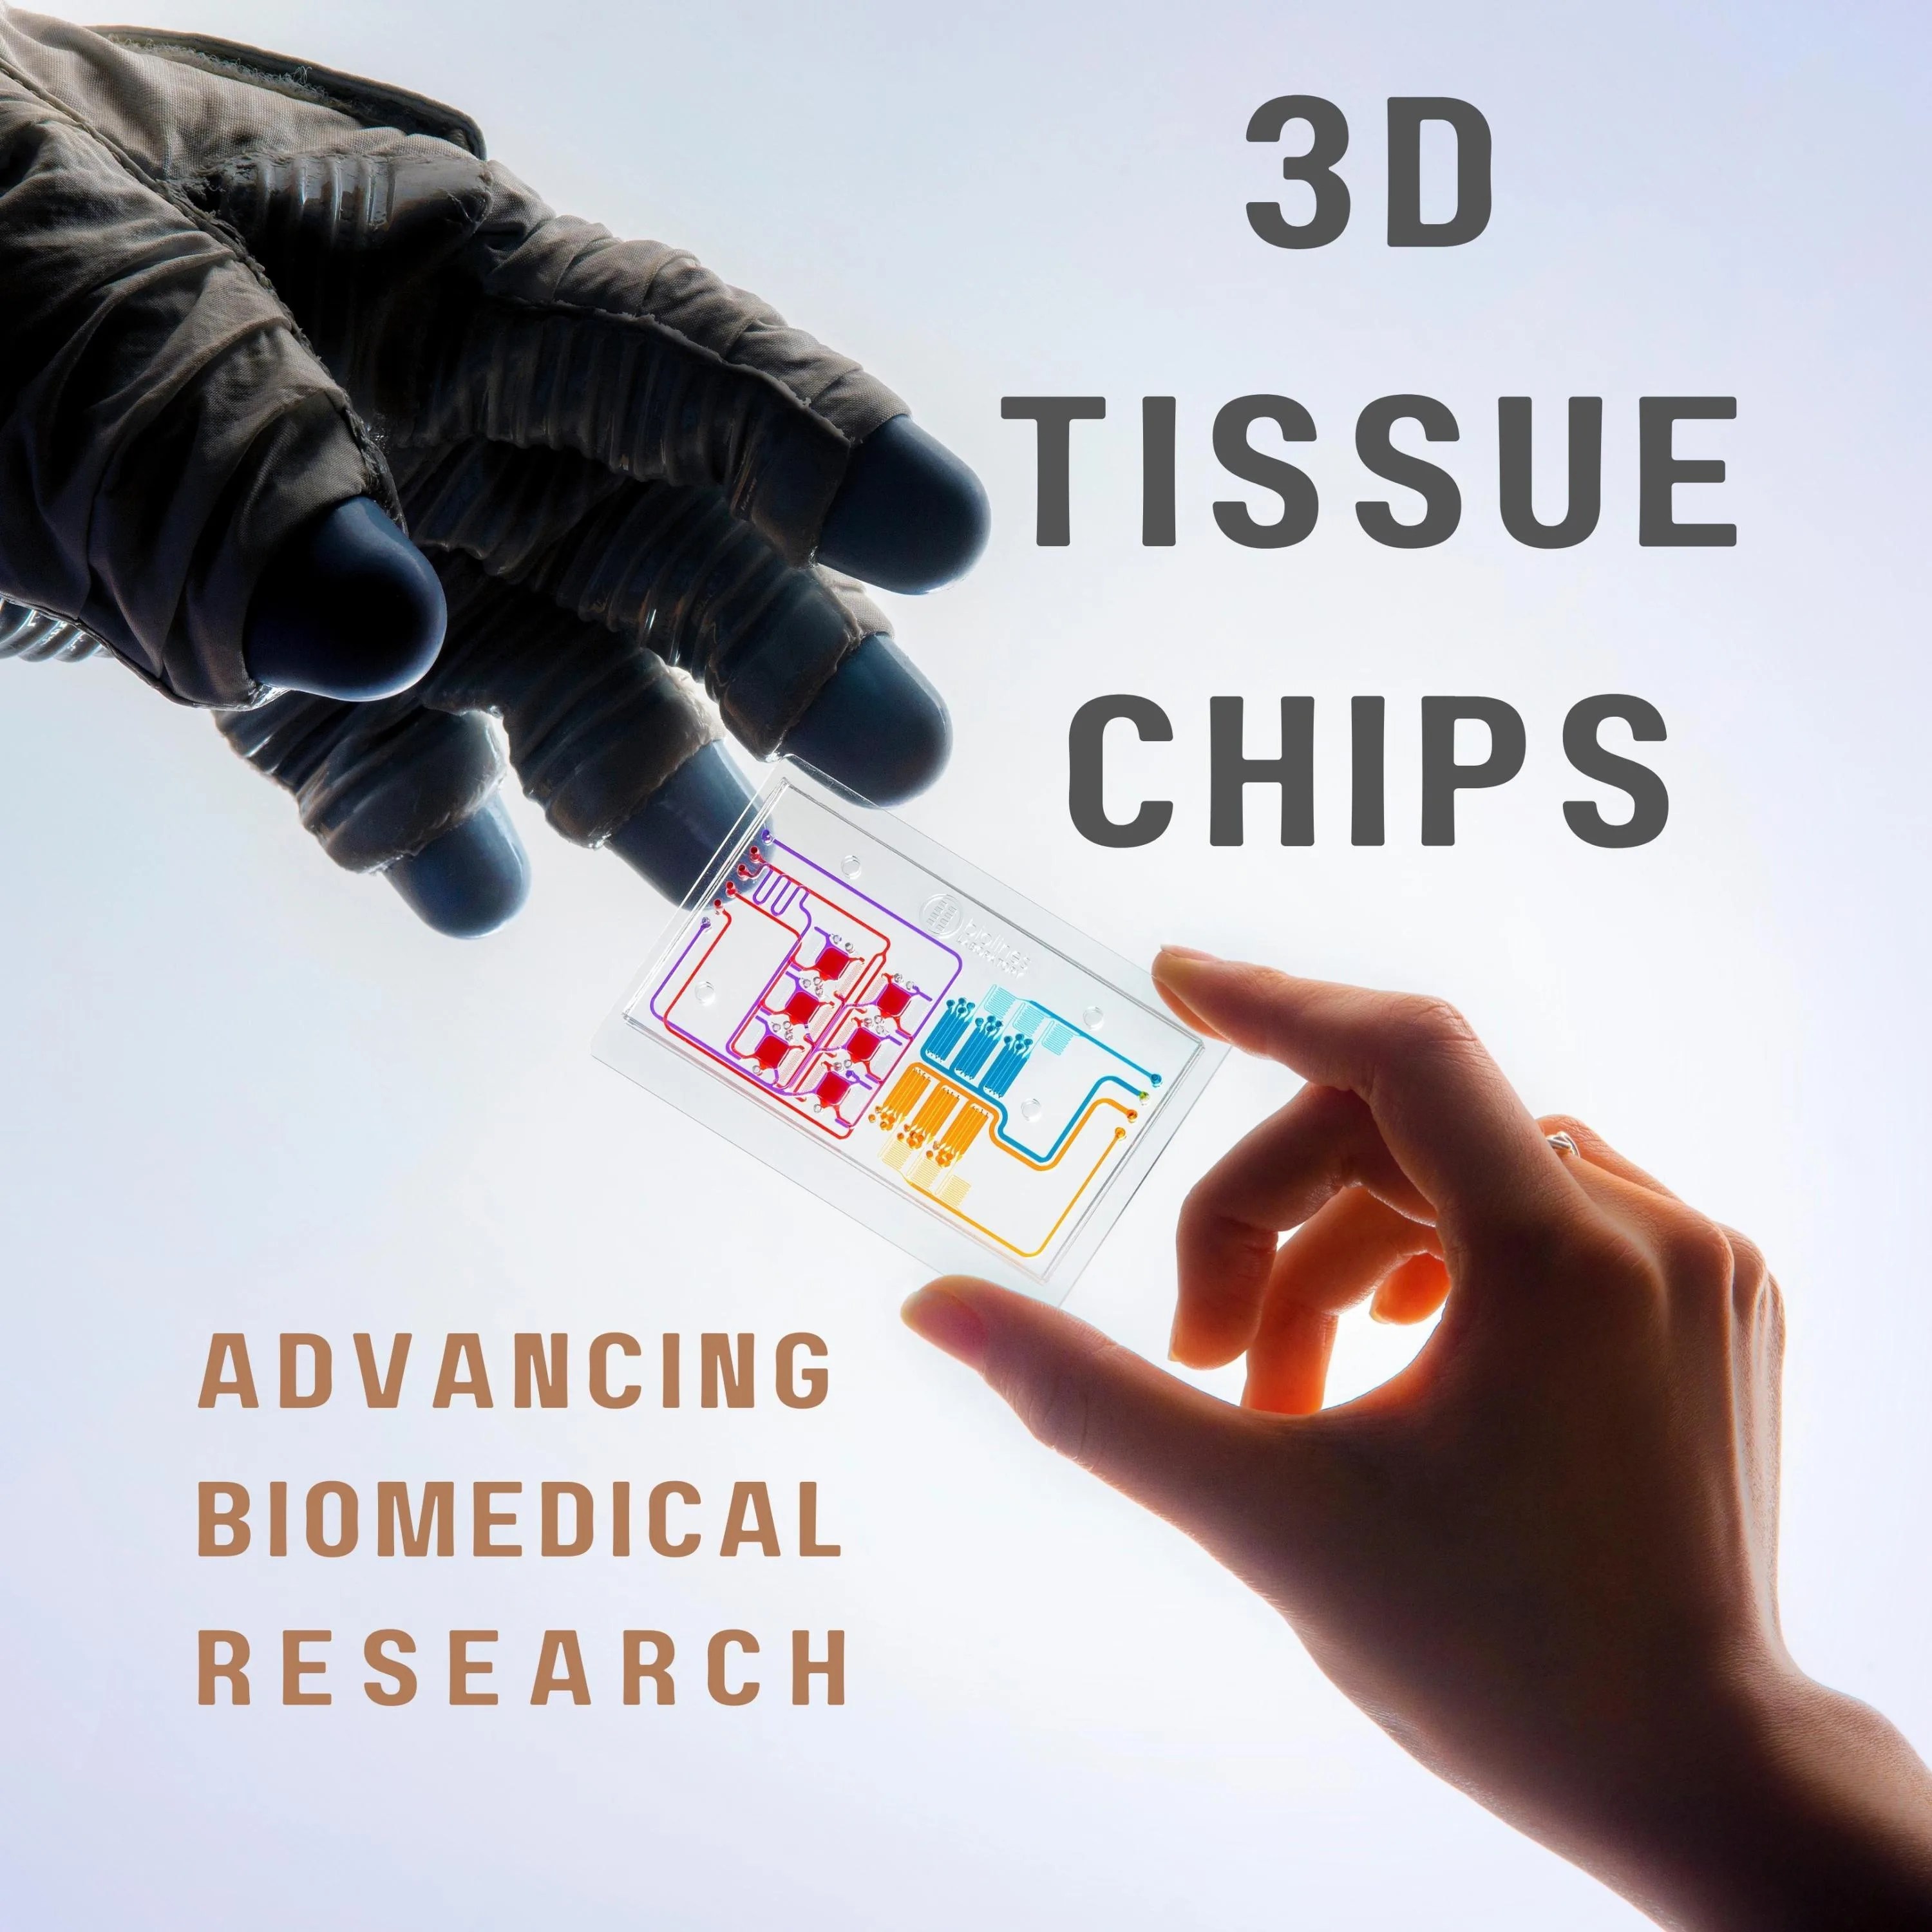 Image of a gloved hand and normal hand exchanging a colorful chip; text reads 3D tissue chips advanced biomedical research